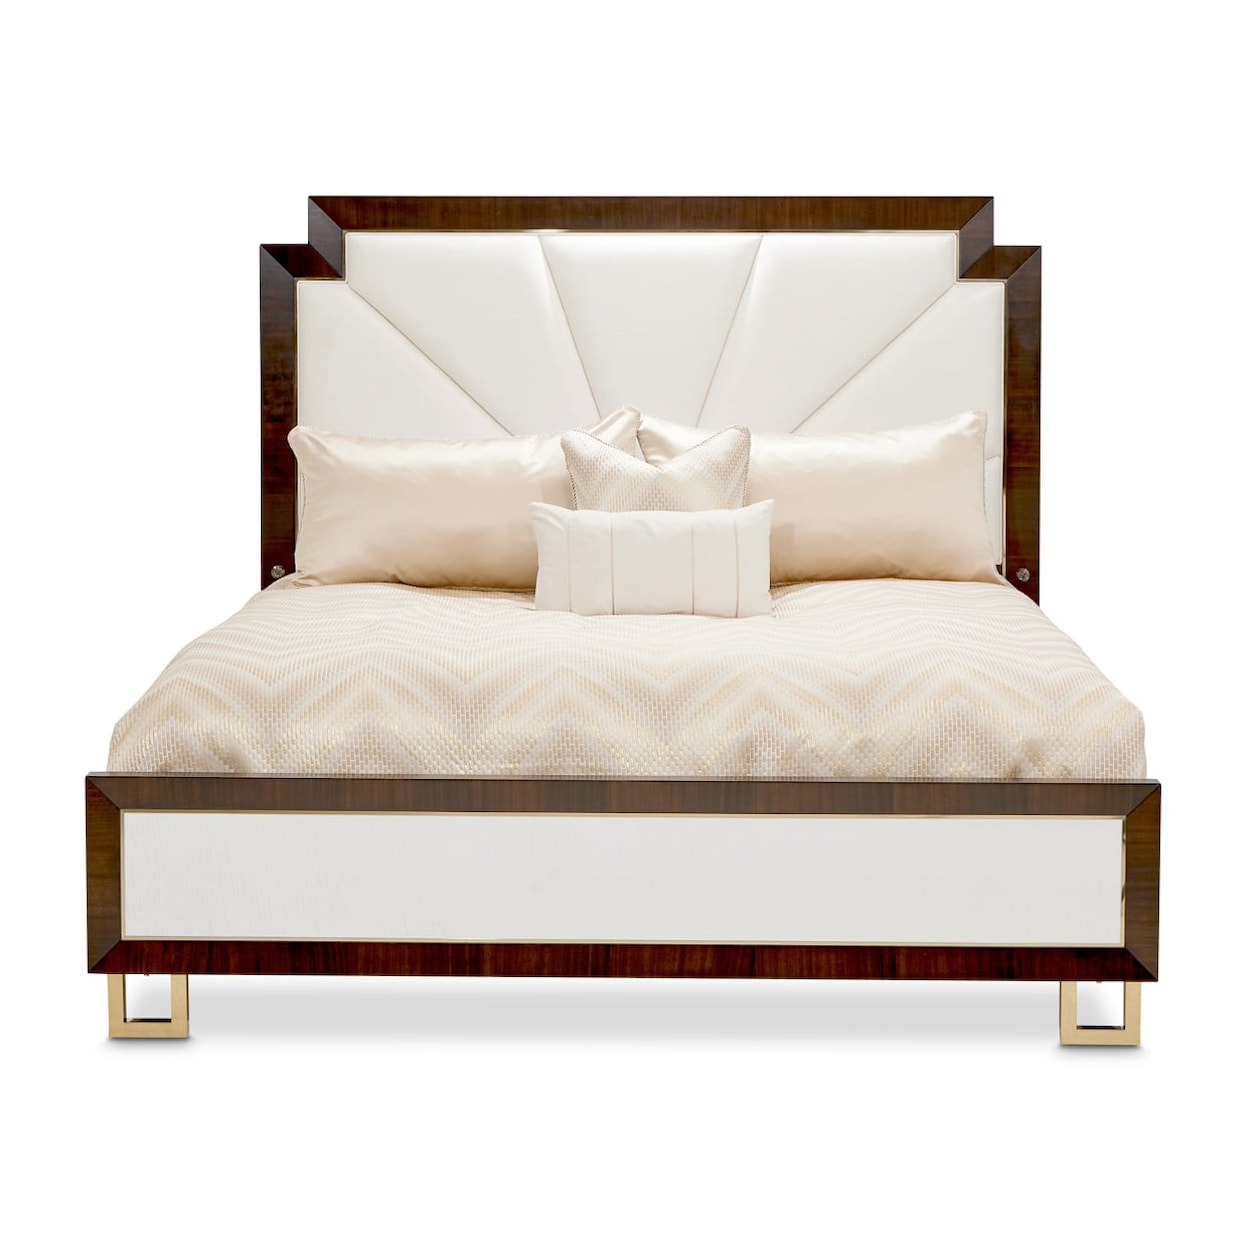 Michael Amini Belmont Place Upholstered California King Bed